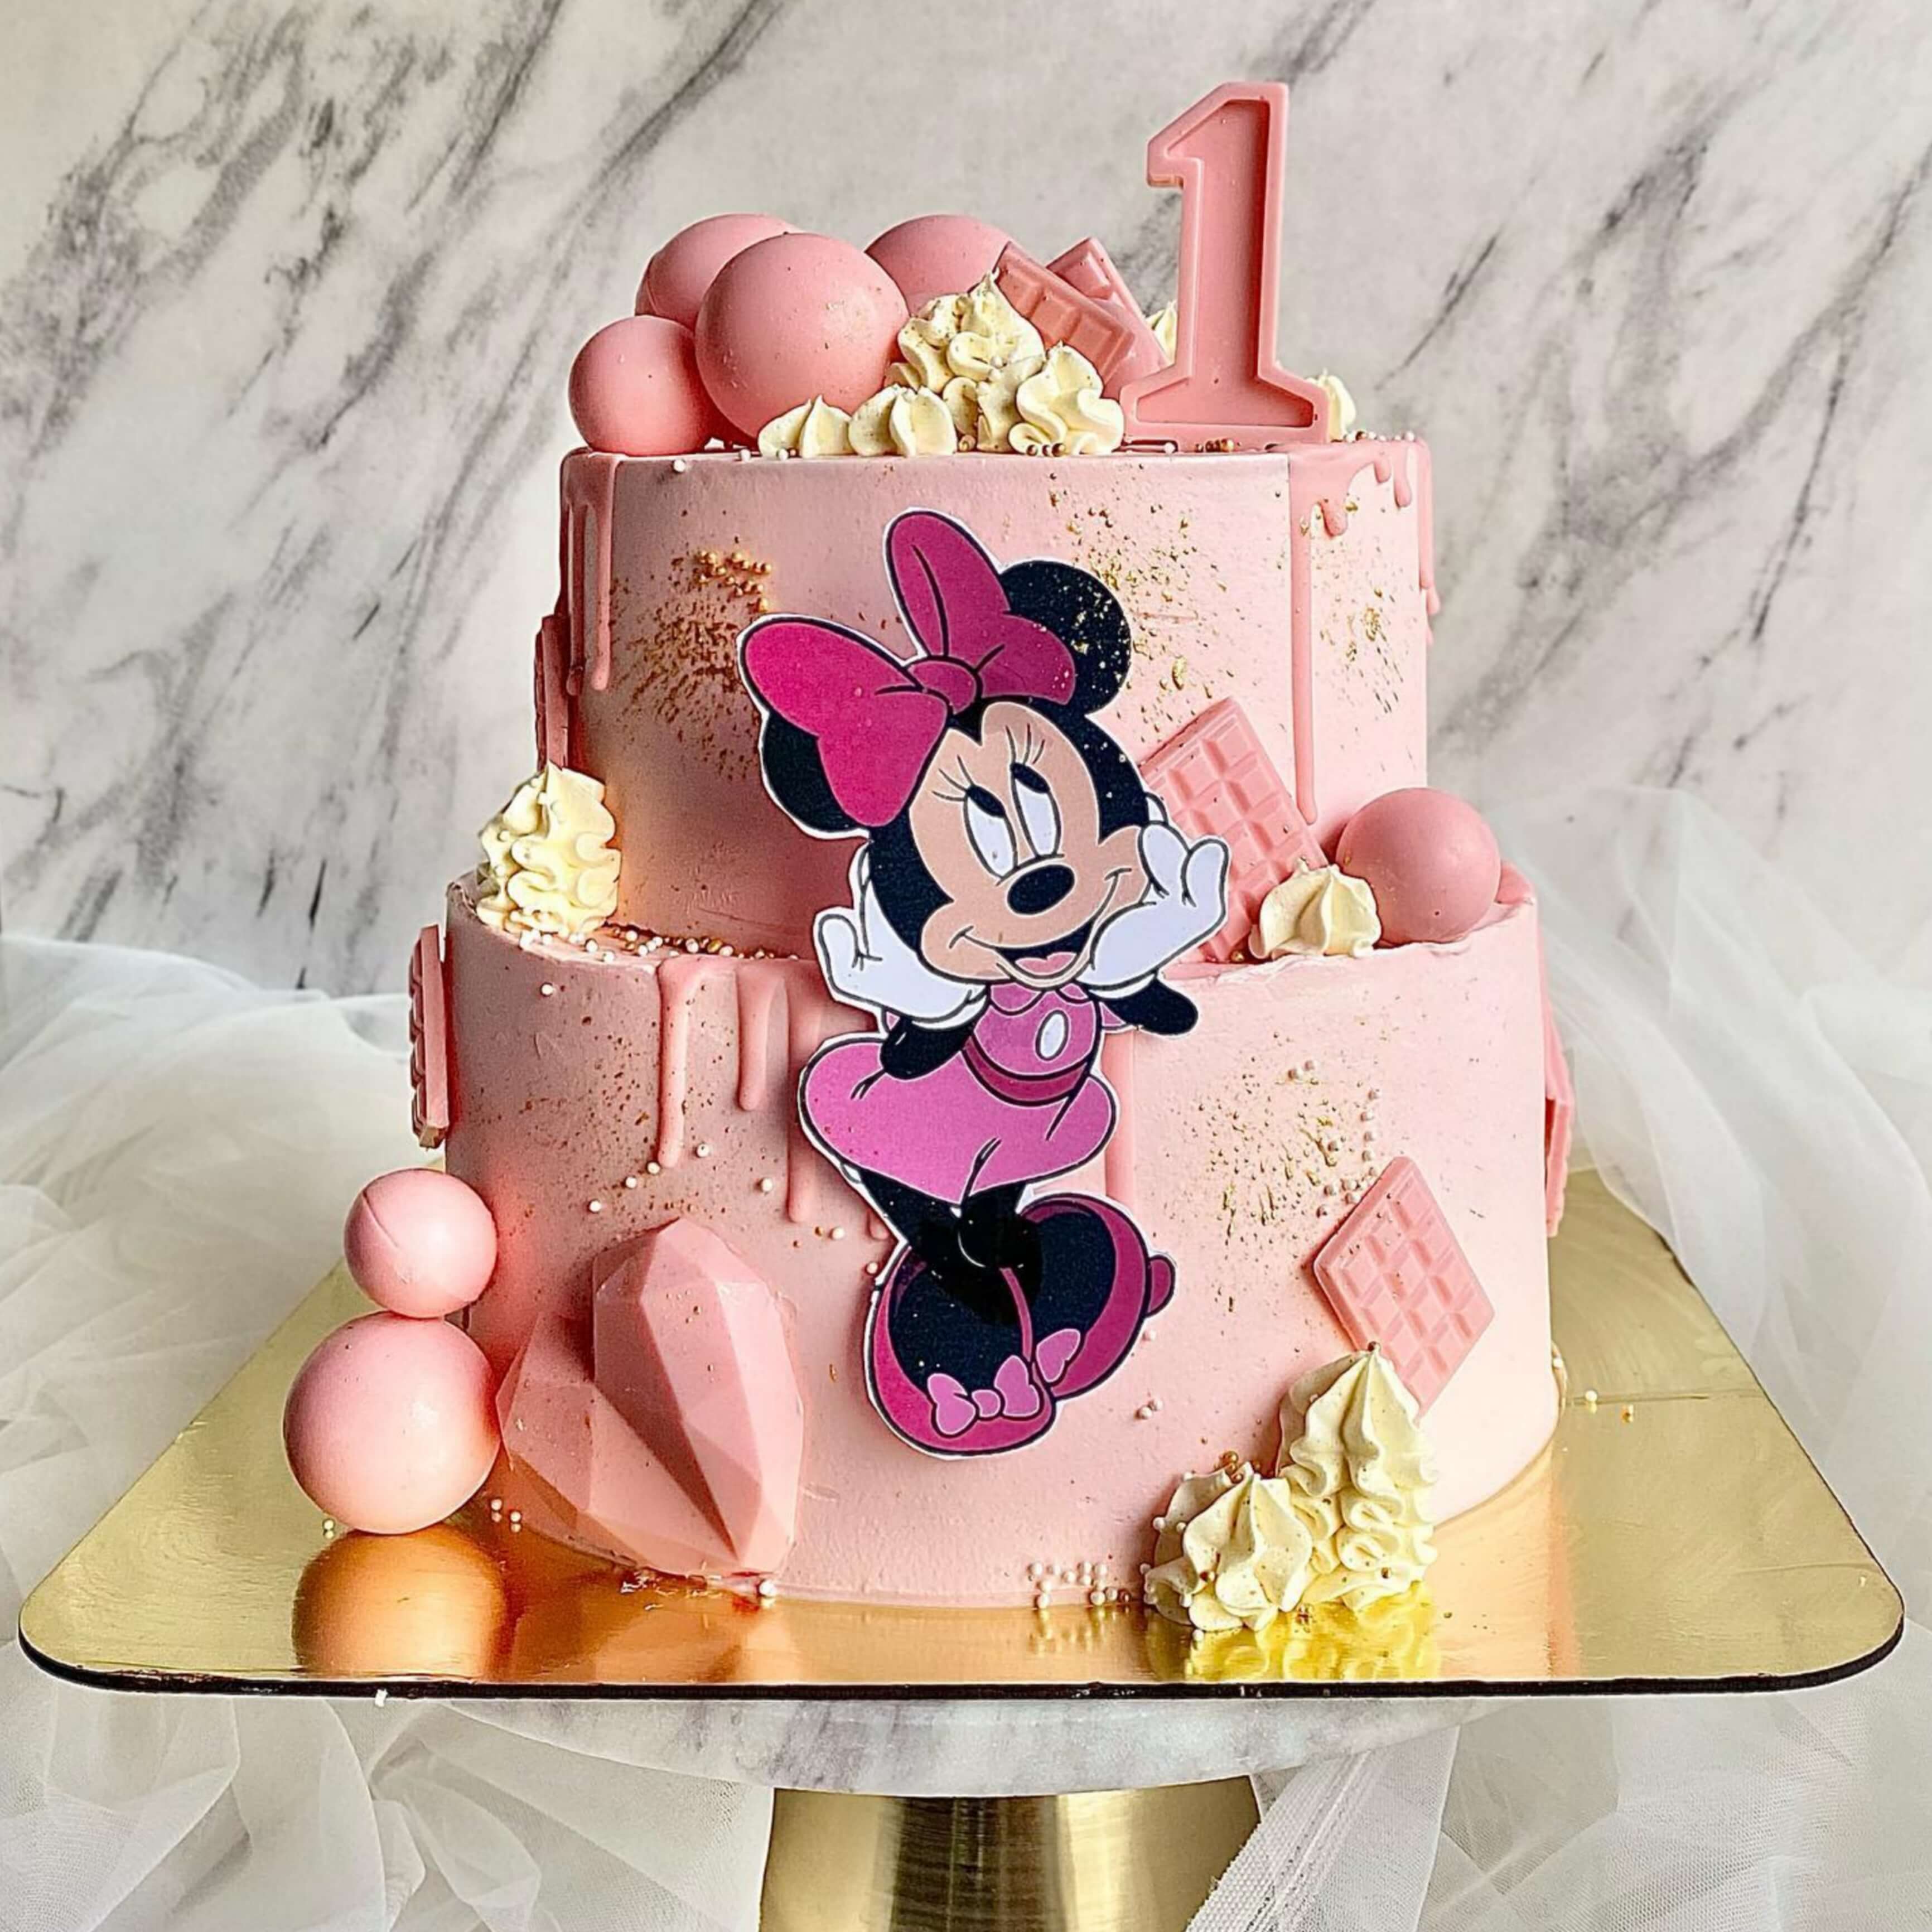 Pin on Birthday Cake Images